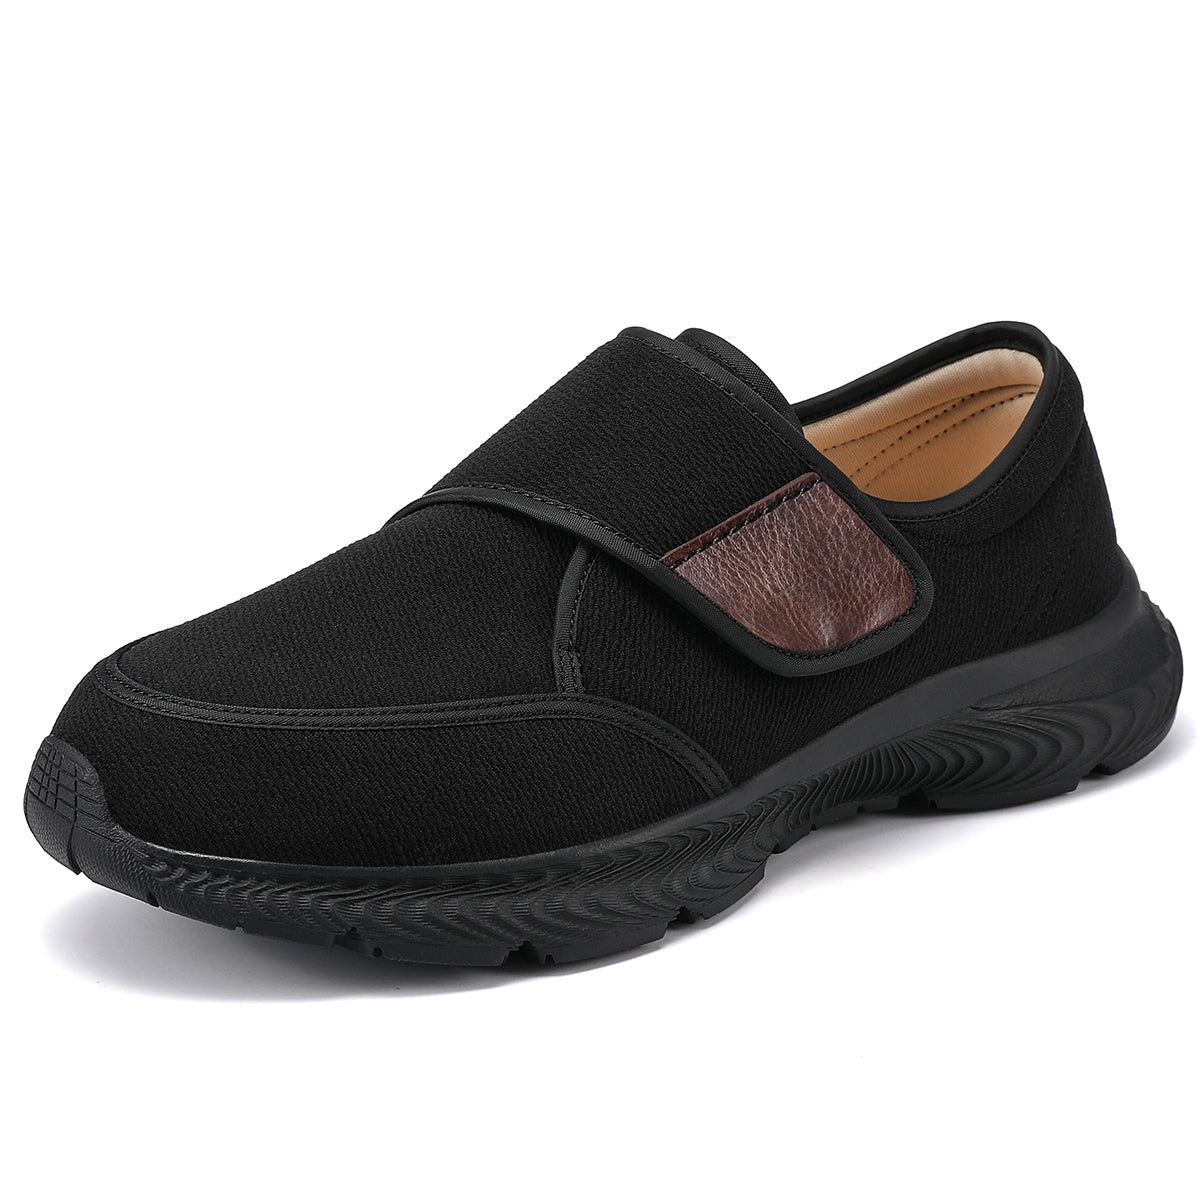 OEM ODM Diabetic Shoes Large Size Wide Toe Box Breathable Shoes with Arch Support Insole Walking Shoes